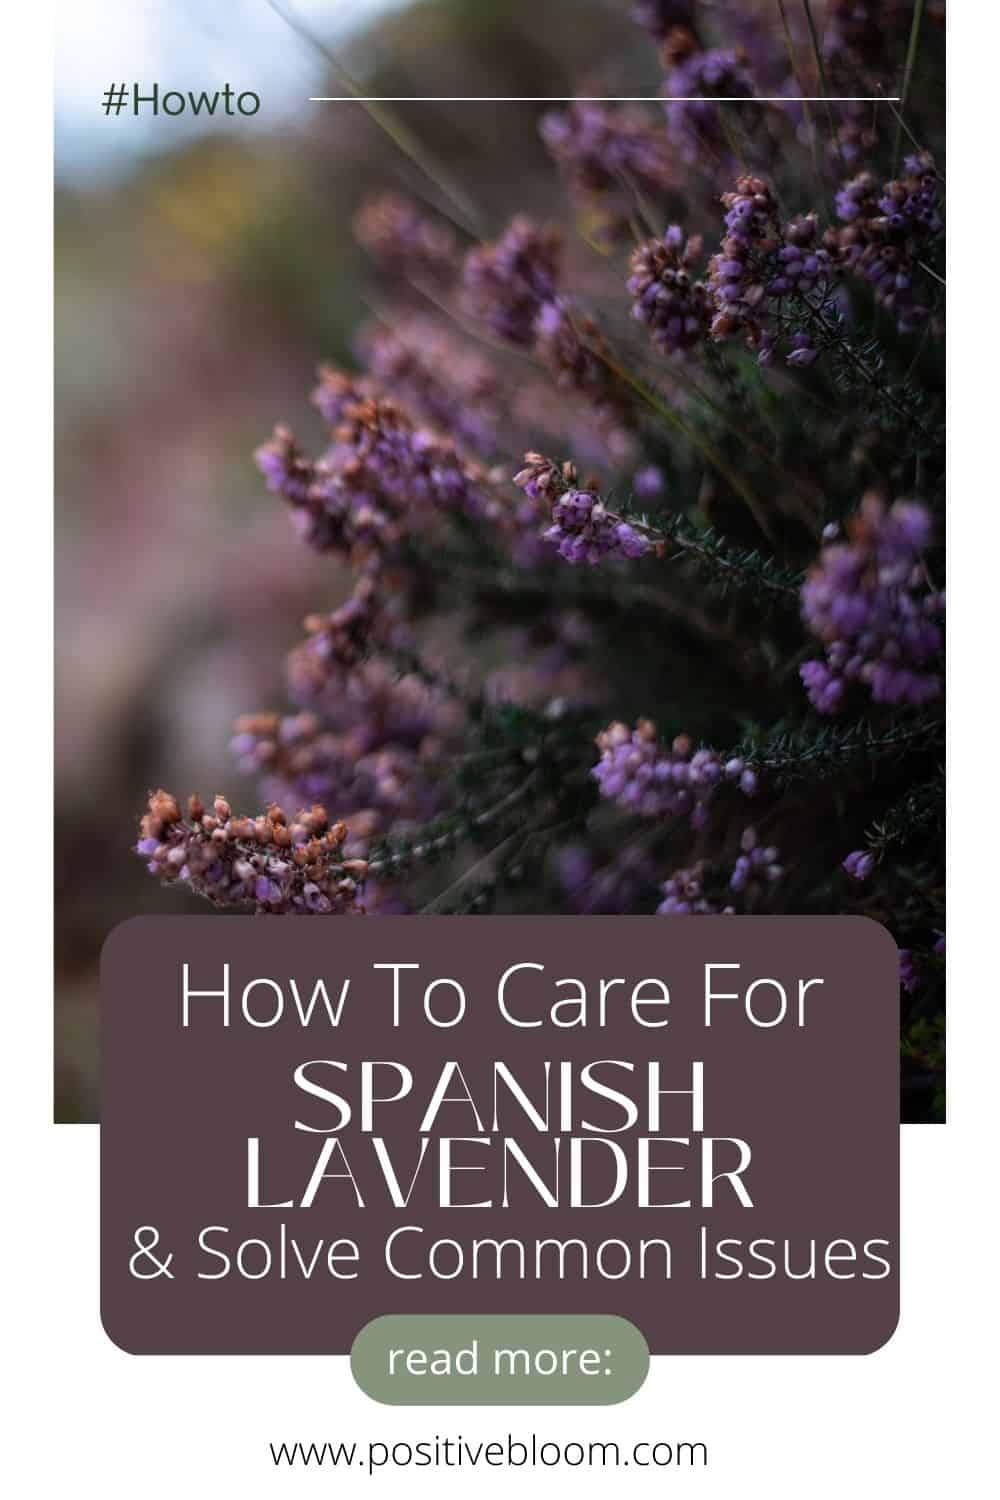 How To Care For Spanish Lavender & Solve Common Issues Pinterest